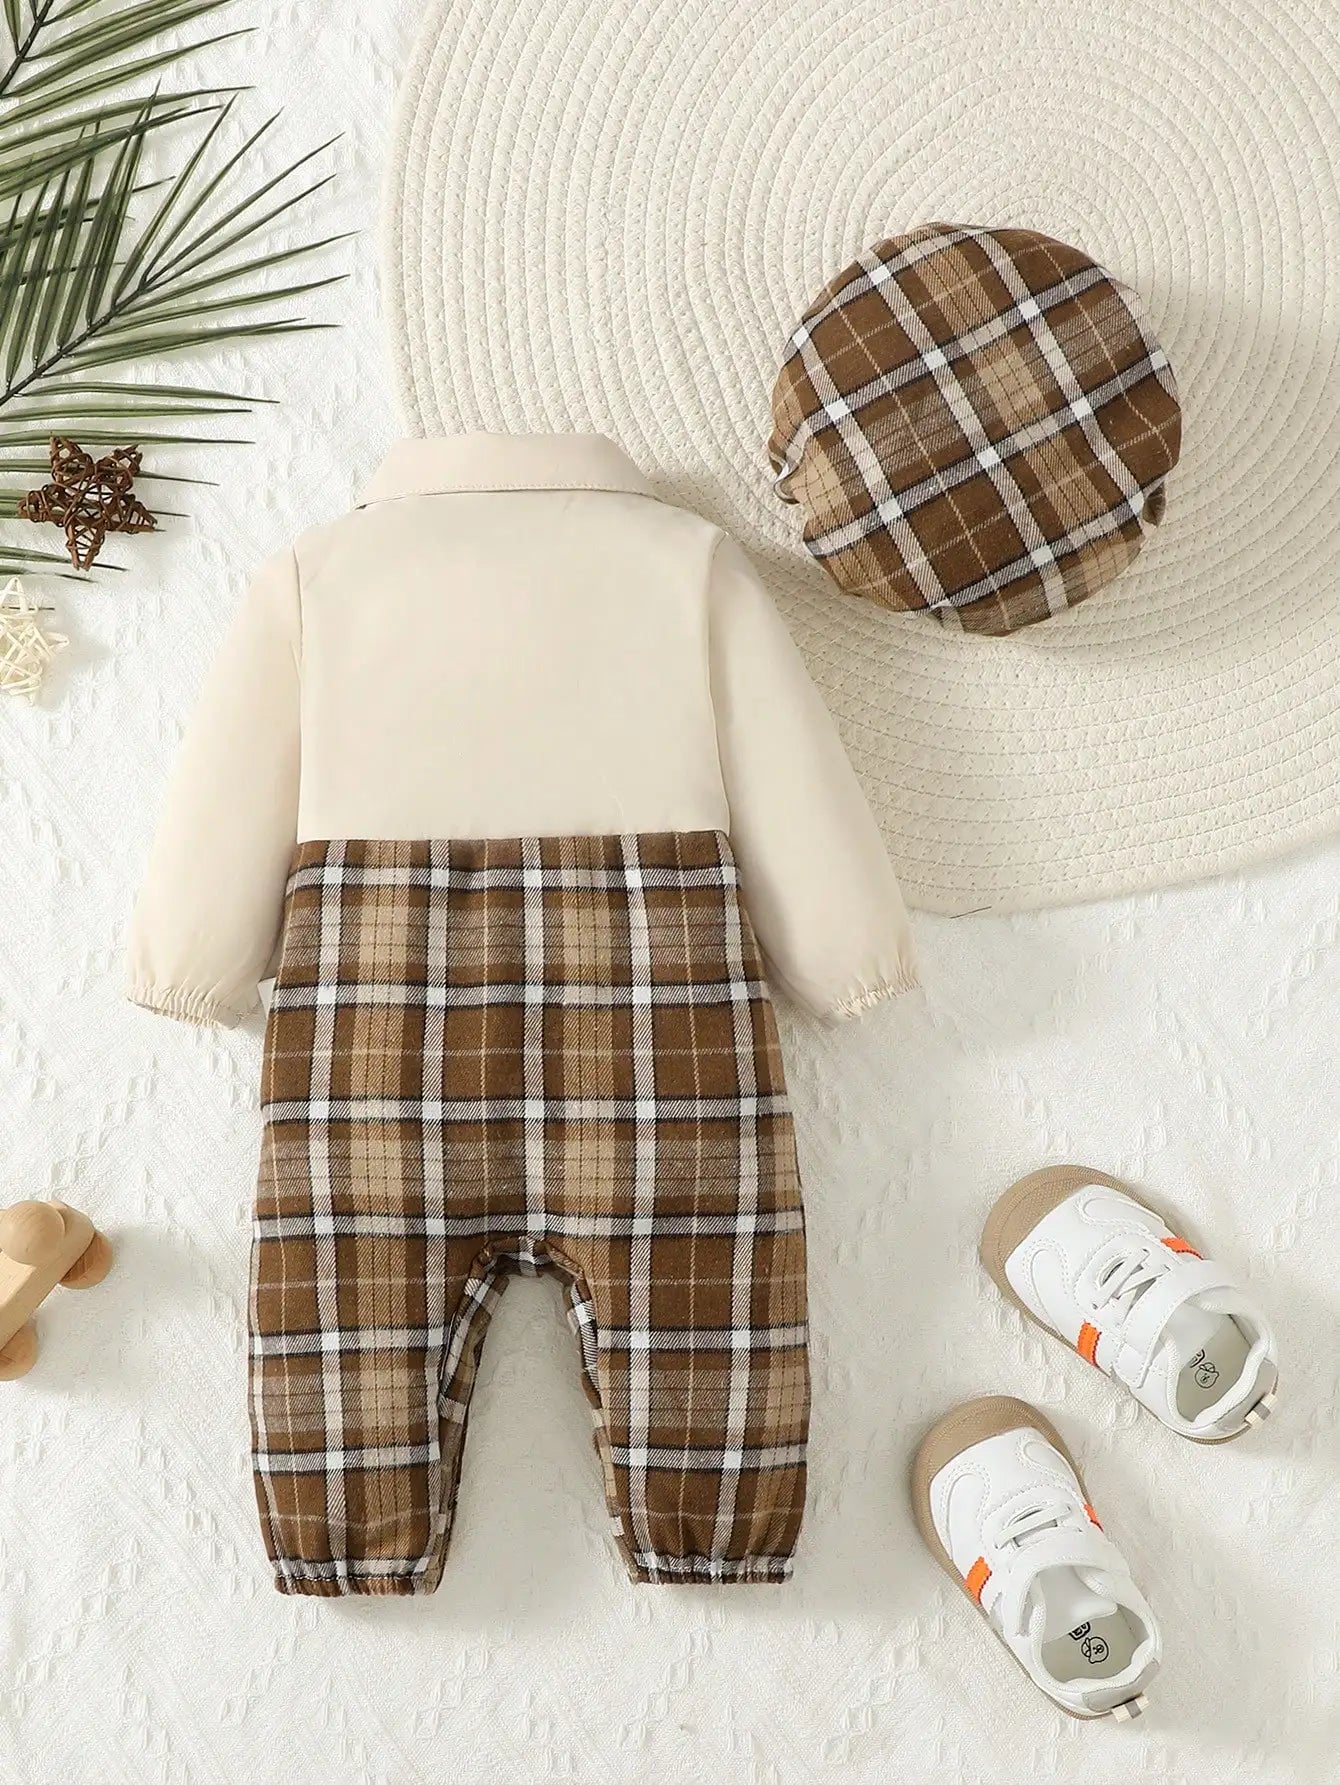 Two-Piece Baby Boy Gentleman Jumpsuit with Lapel Suspenders and Holmes Hat